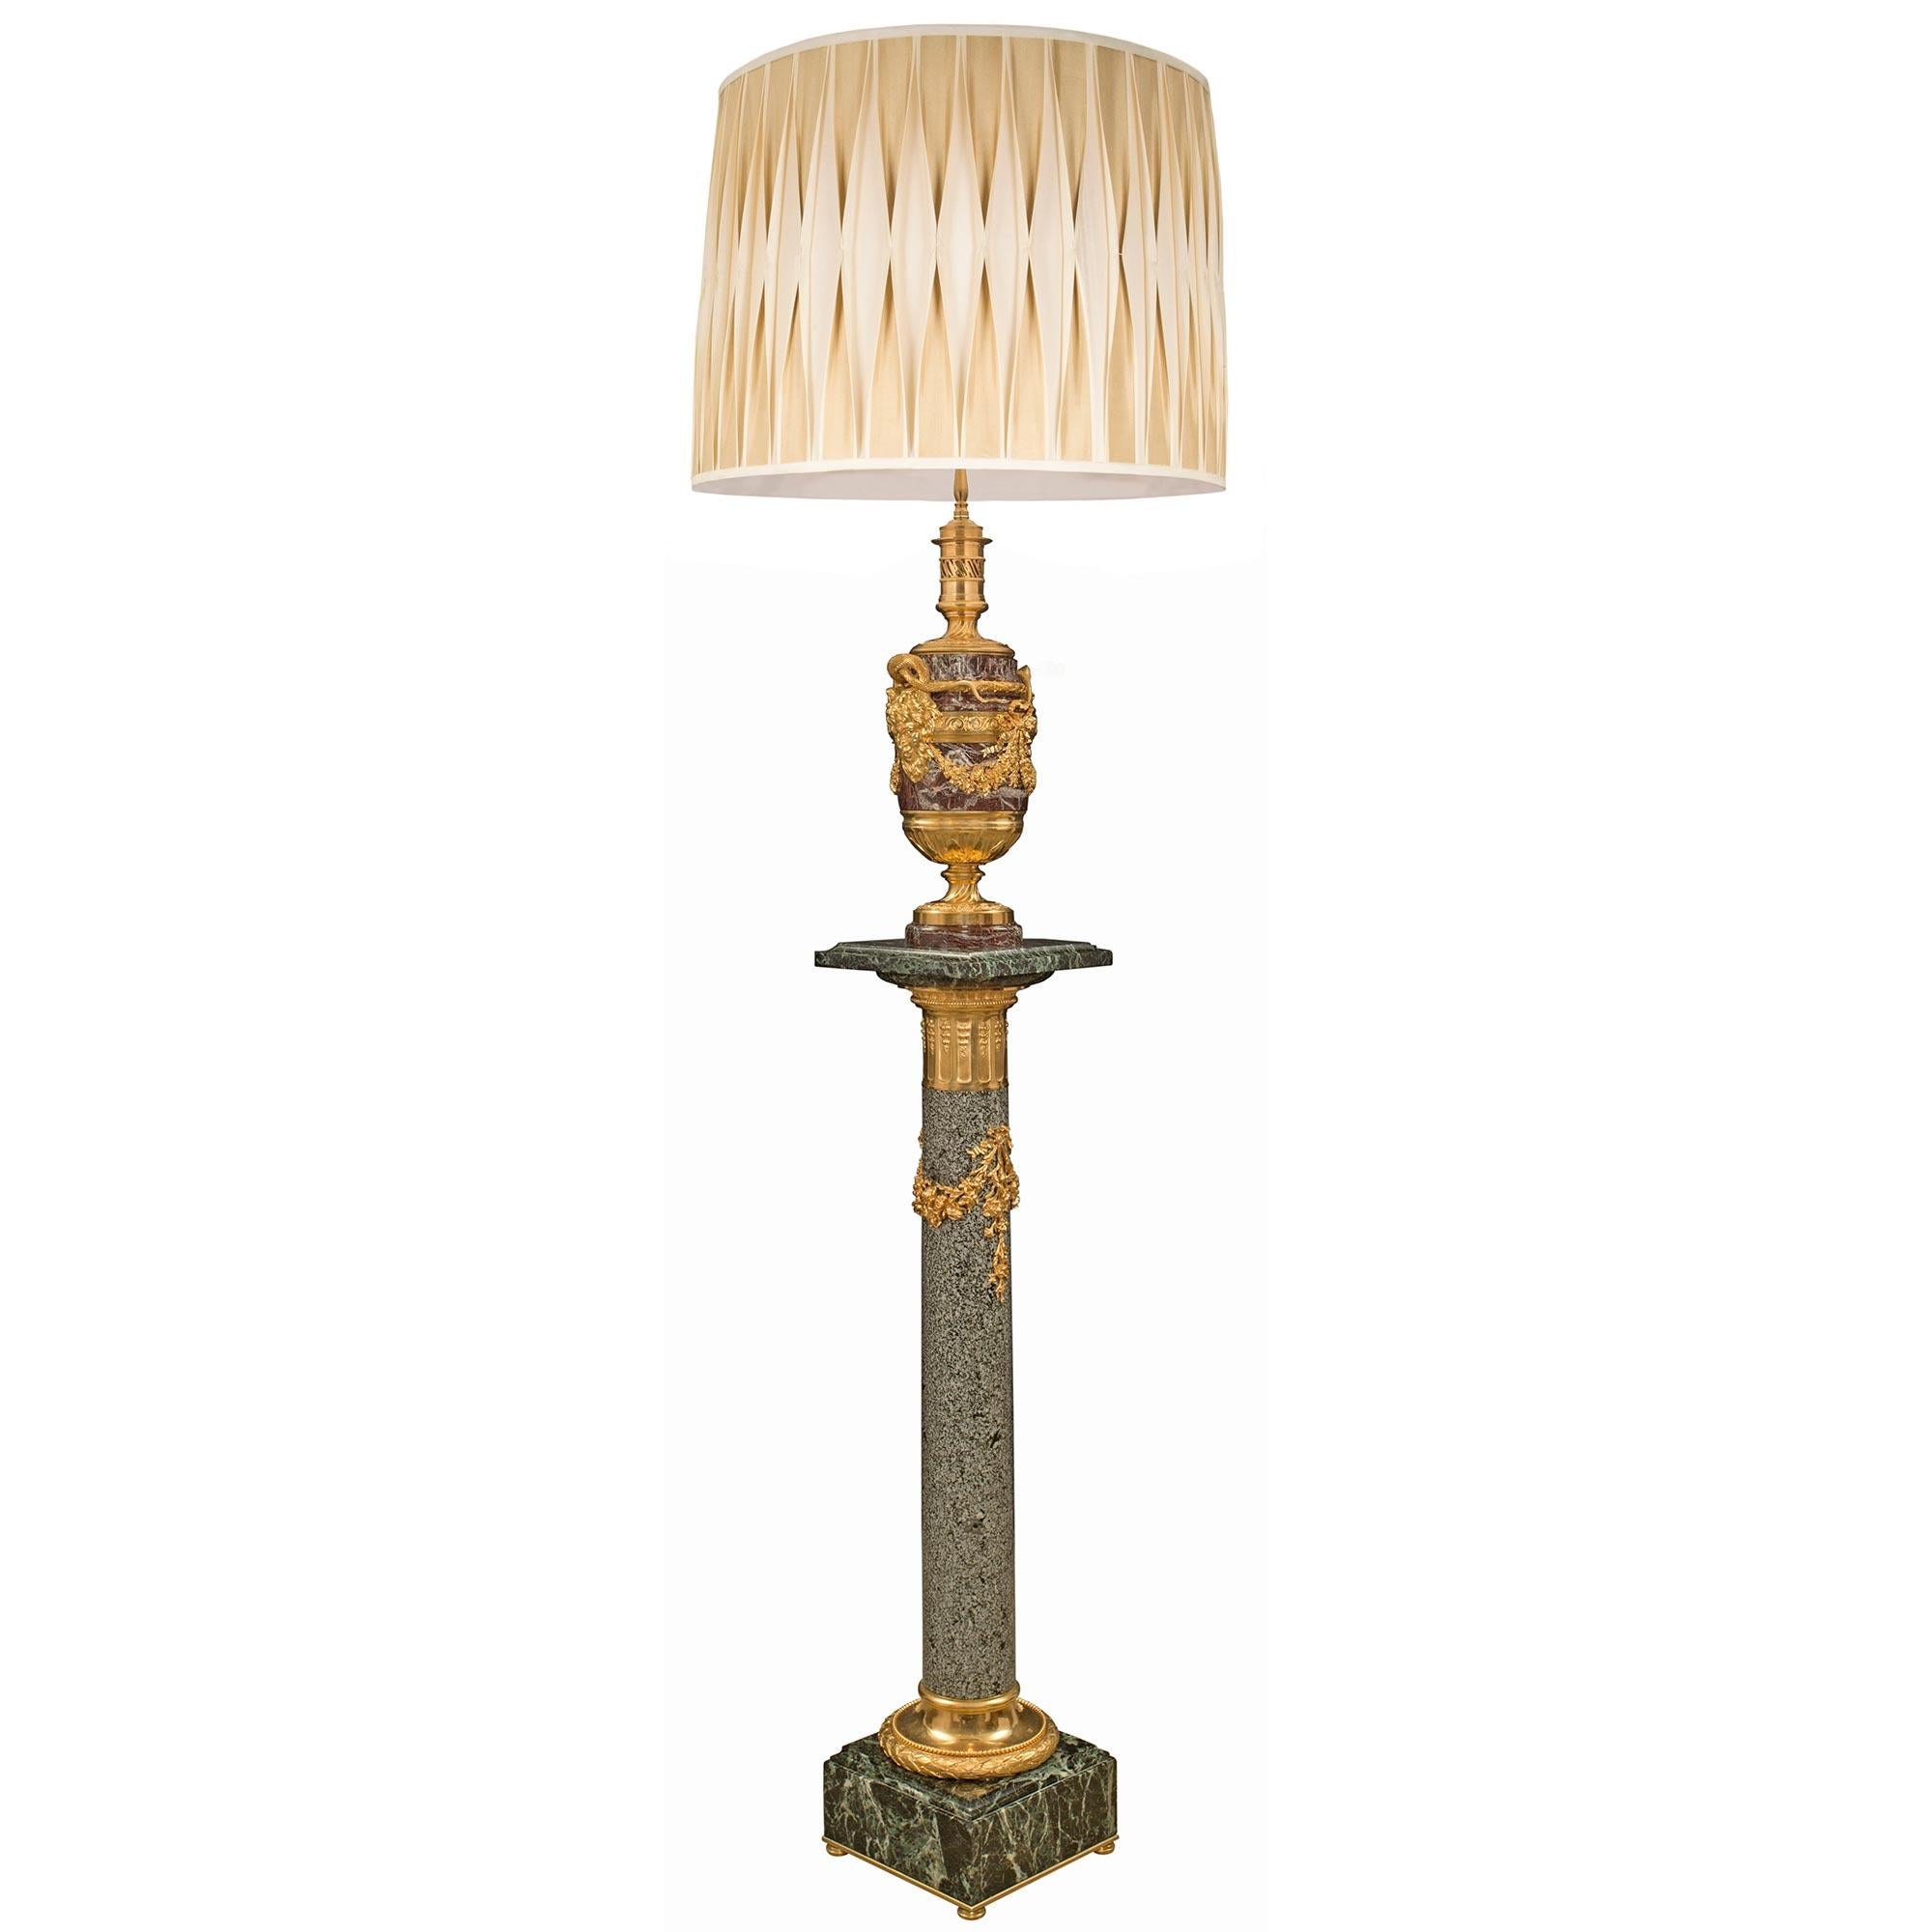 A stunning French 19th century Louis XVI st. Belle Époque period Rosso Levanto and Vert de Patricia marble, granite and ormolu floor lamp, attributed to Henry Dasson. The floor lamp was once an oil lamp, is raised by a square Vert de Patricia base